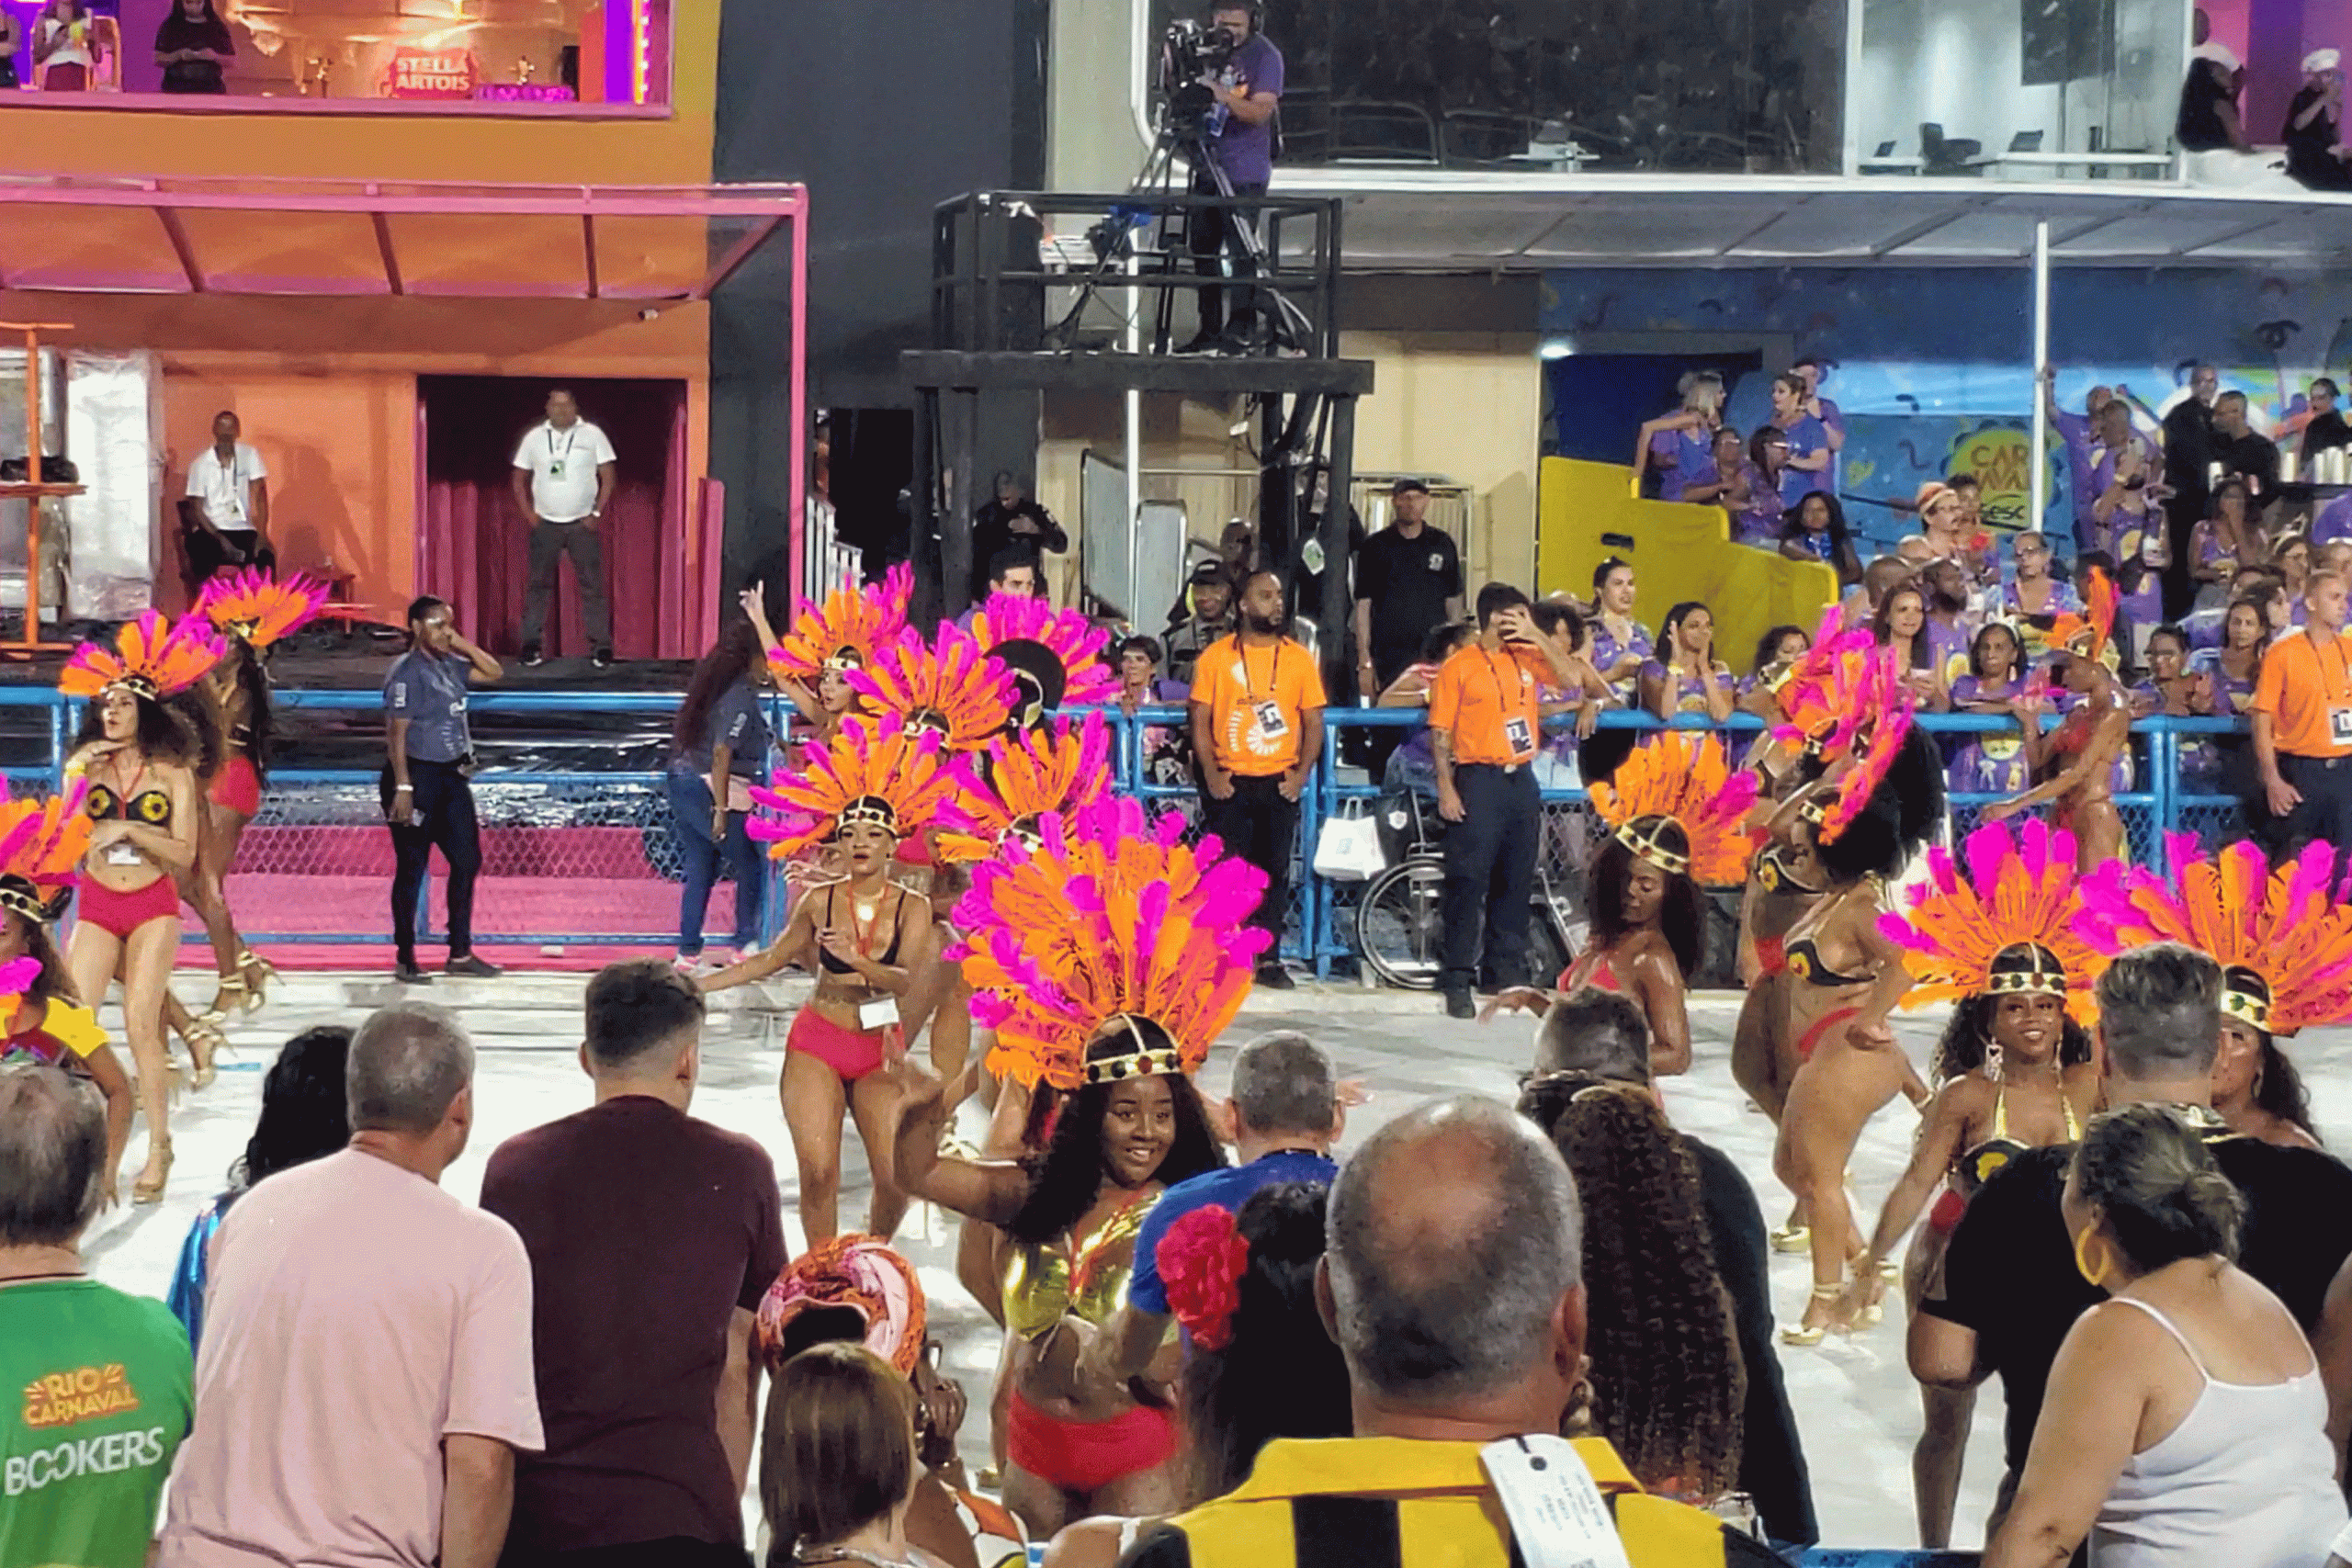 Carnival in Rio: Samba & extravagance, the most famous of Brazil!